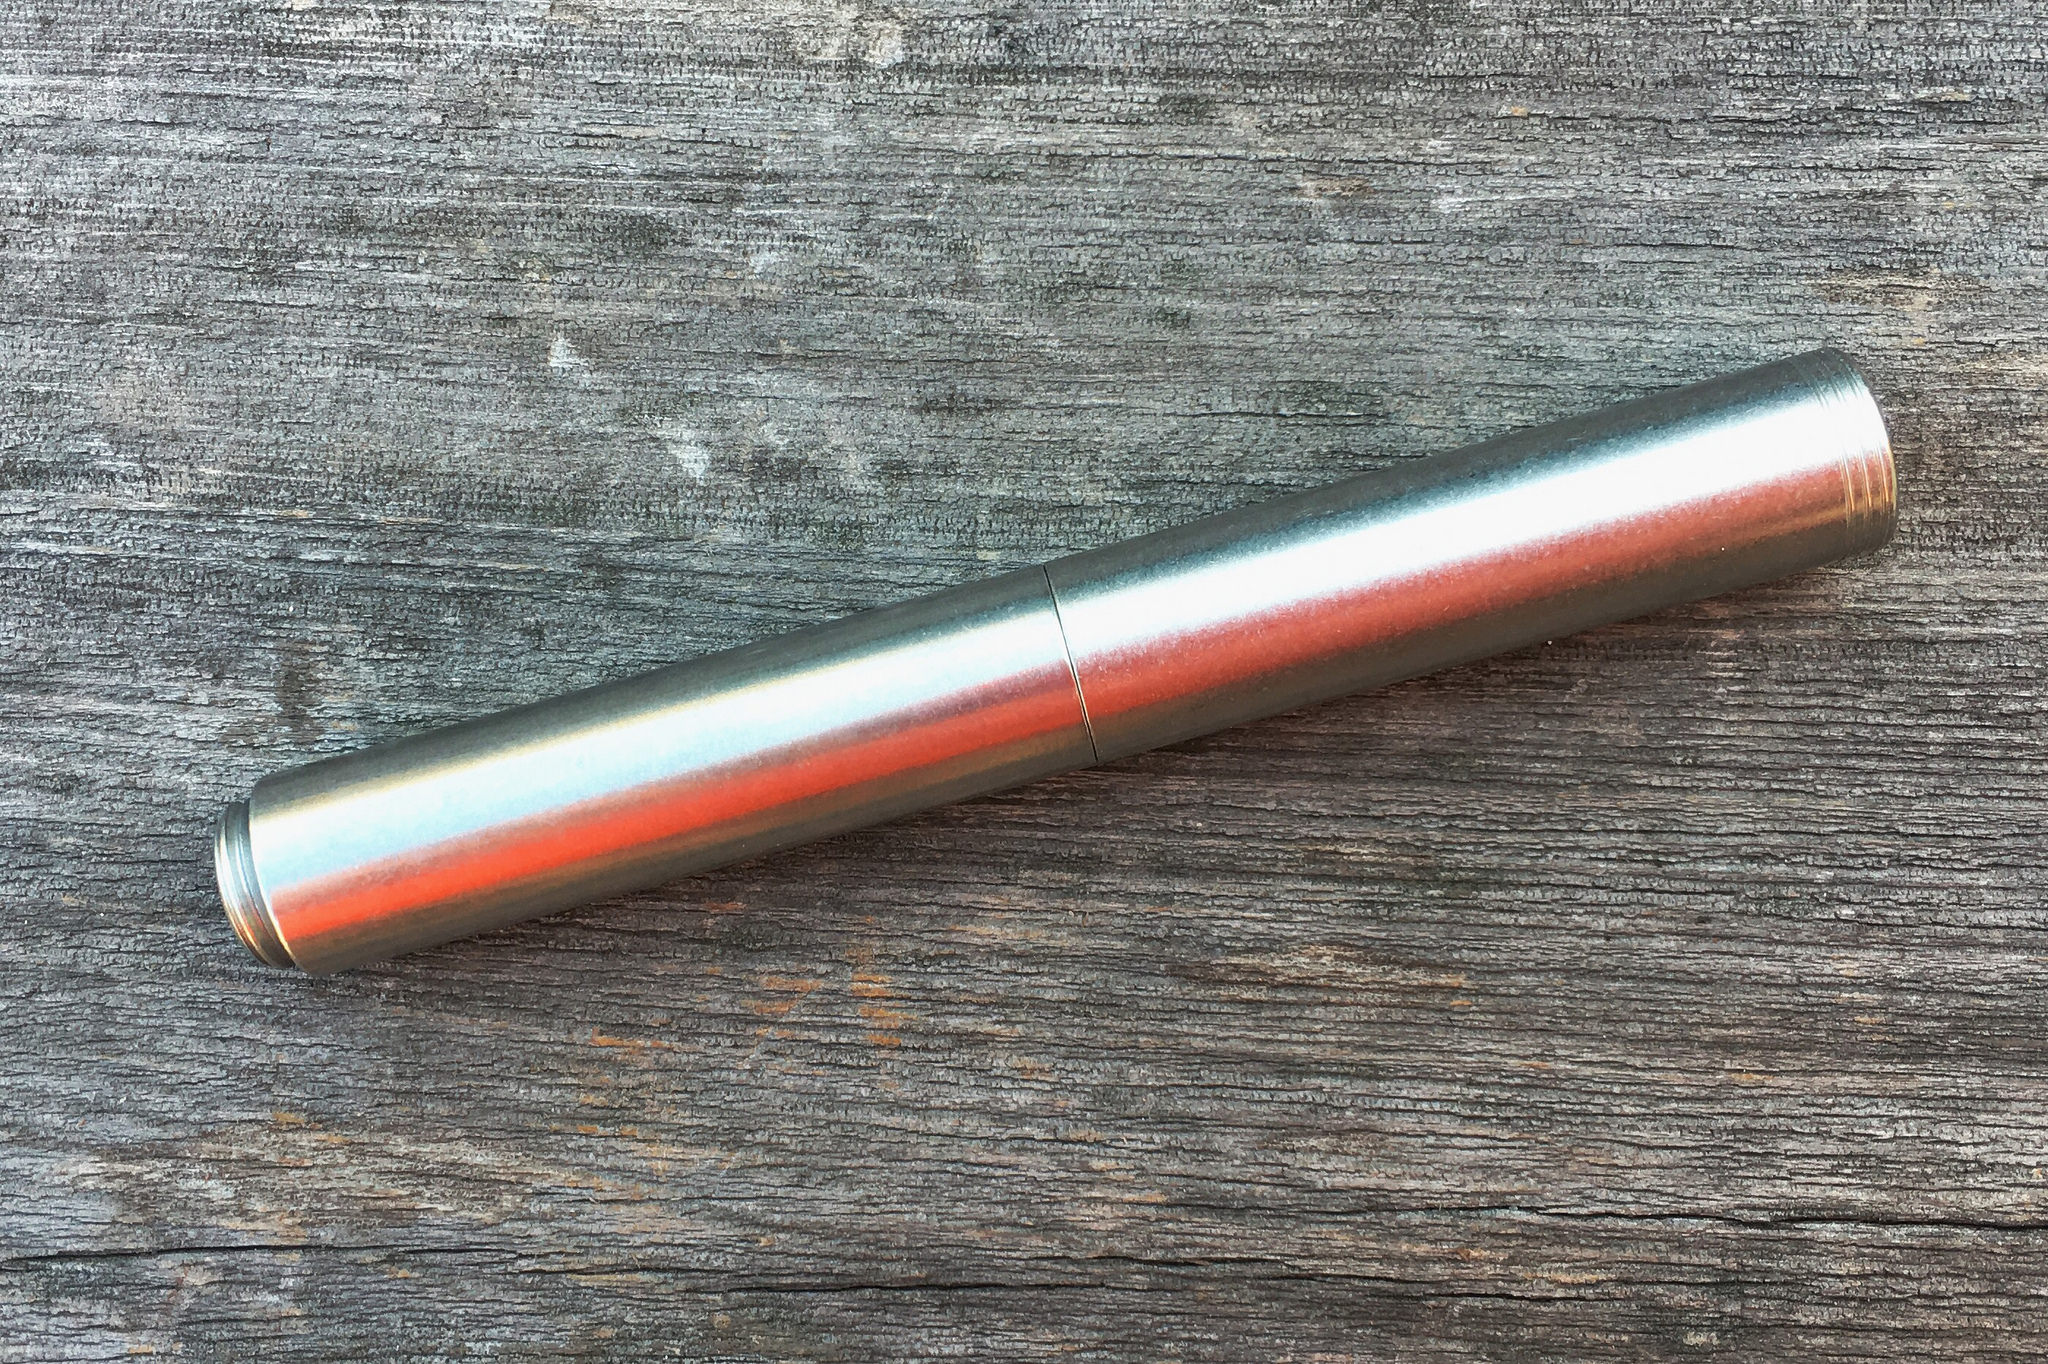 Schon Dsgn #01S Tumbled Stainless Steel Pocket Pen Review — The